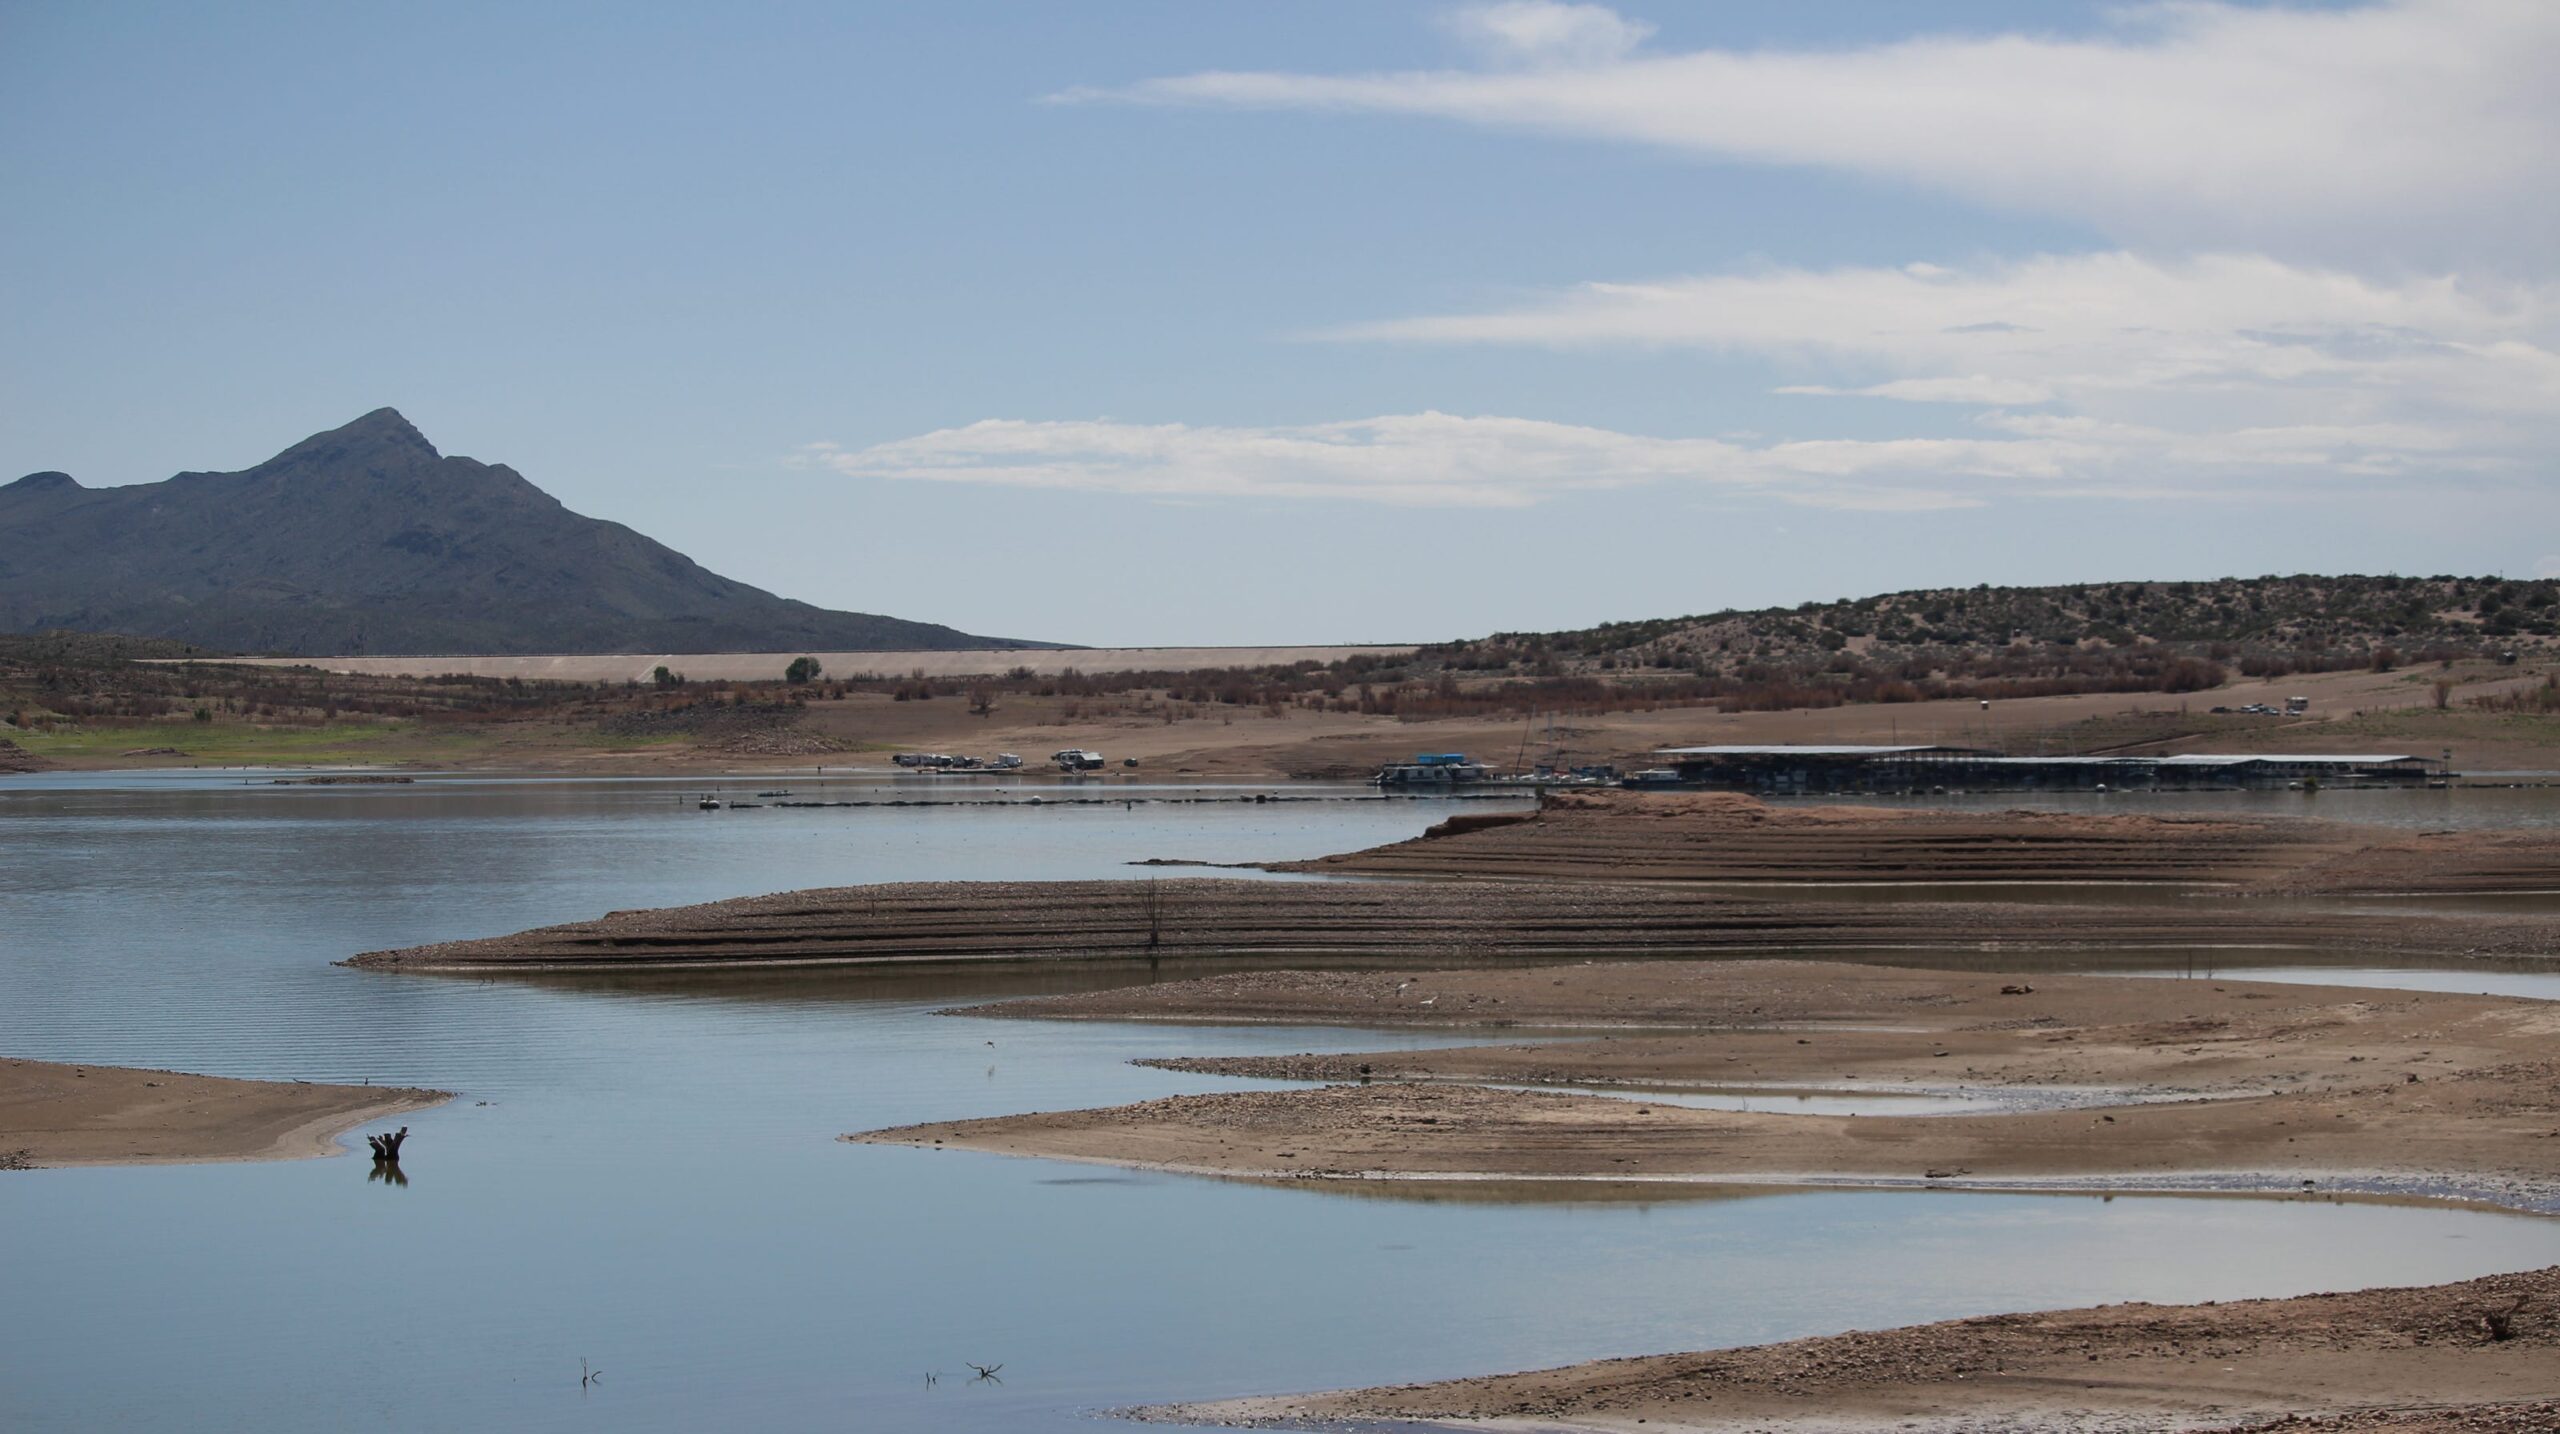 How Full is Elephant Butte Lake